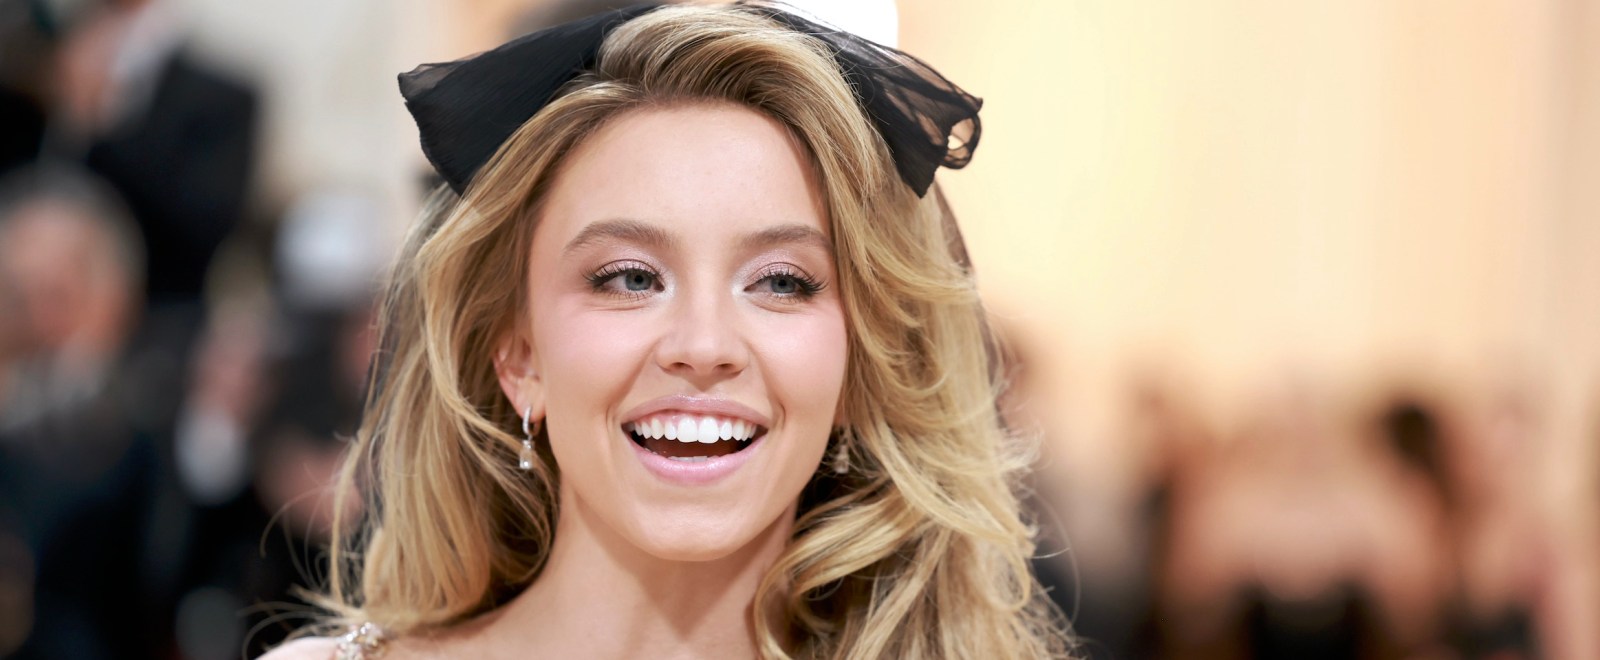 An Airline (?) Is Trolling Sydney Sweeney Over Her Childhood Crush